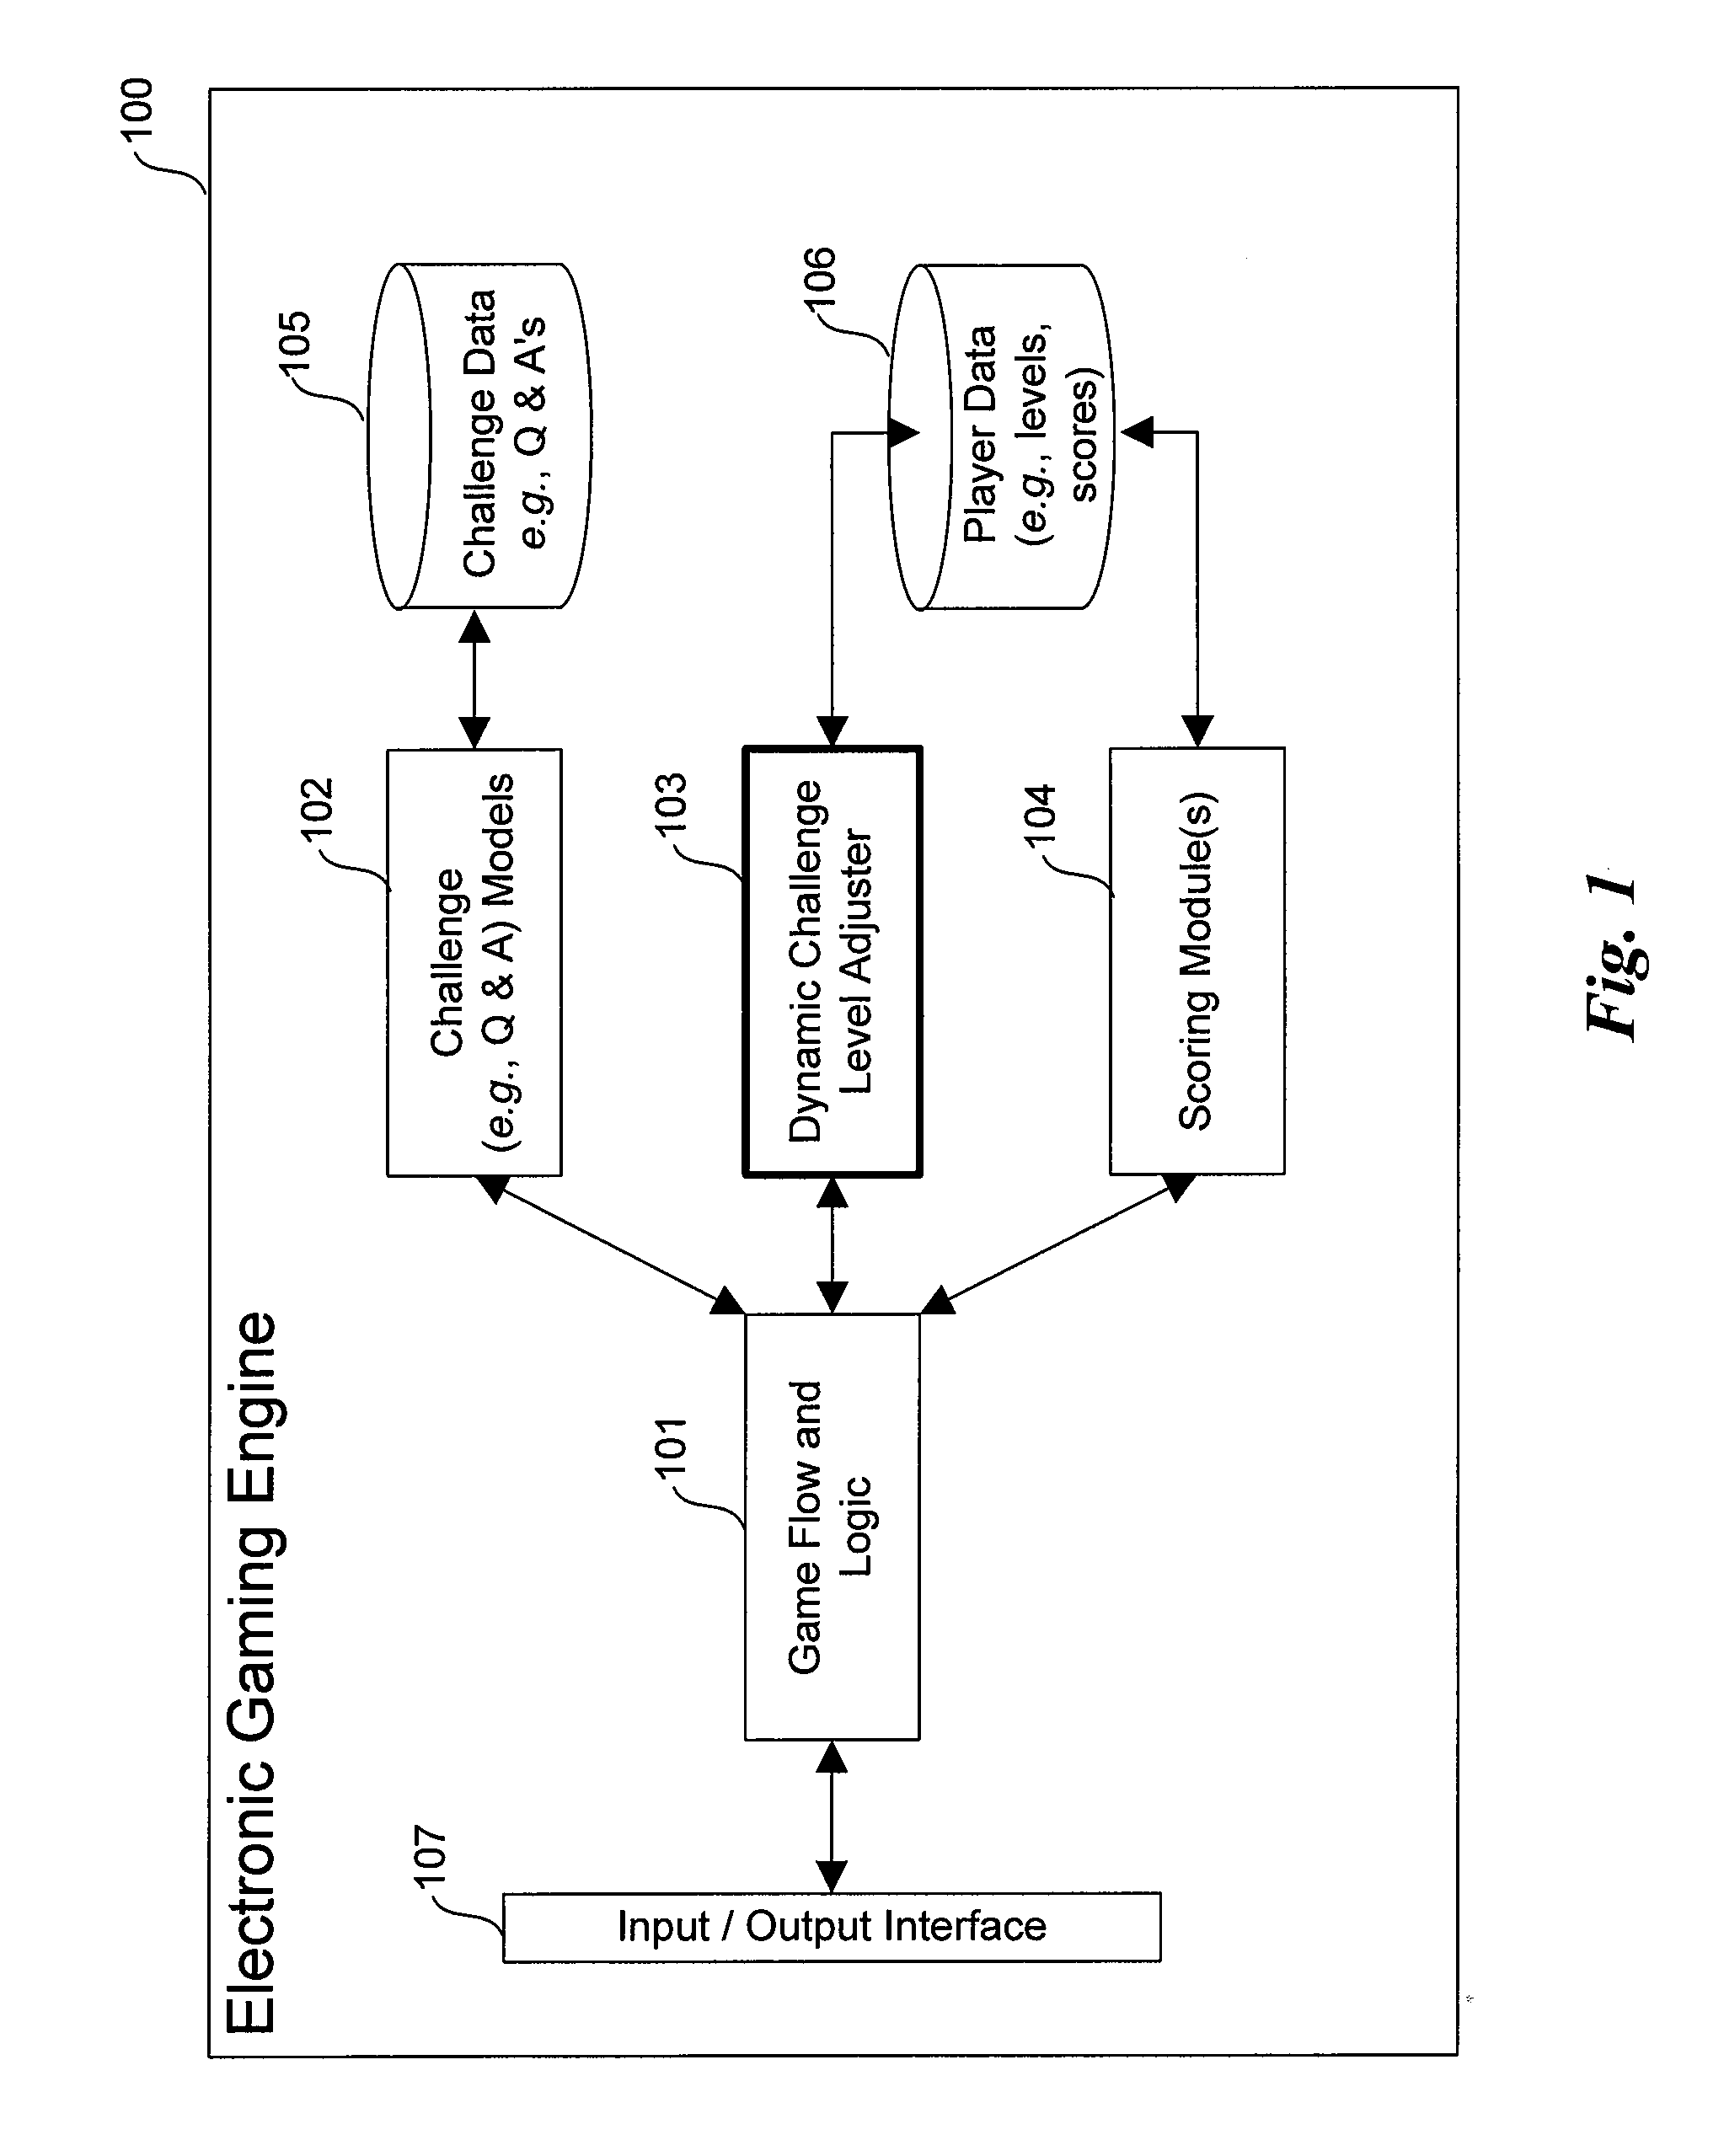 Method and system for dynamically leveling game play in electronic gaming environments